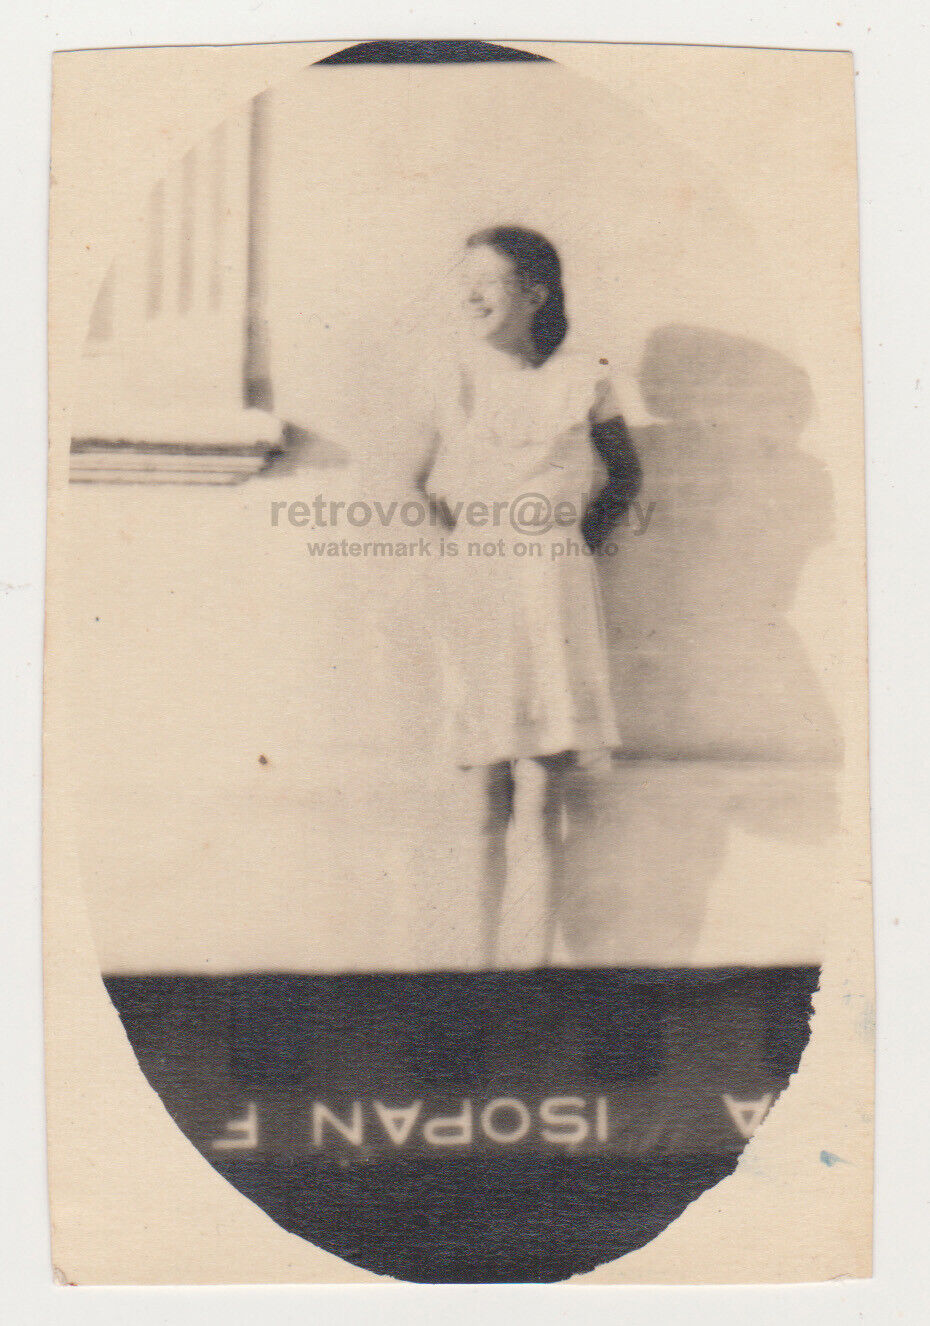 Pretty Cute Young Woman Mysterious Odd Error Unusual Snapshot Vintage Photo